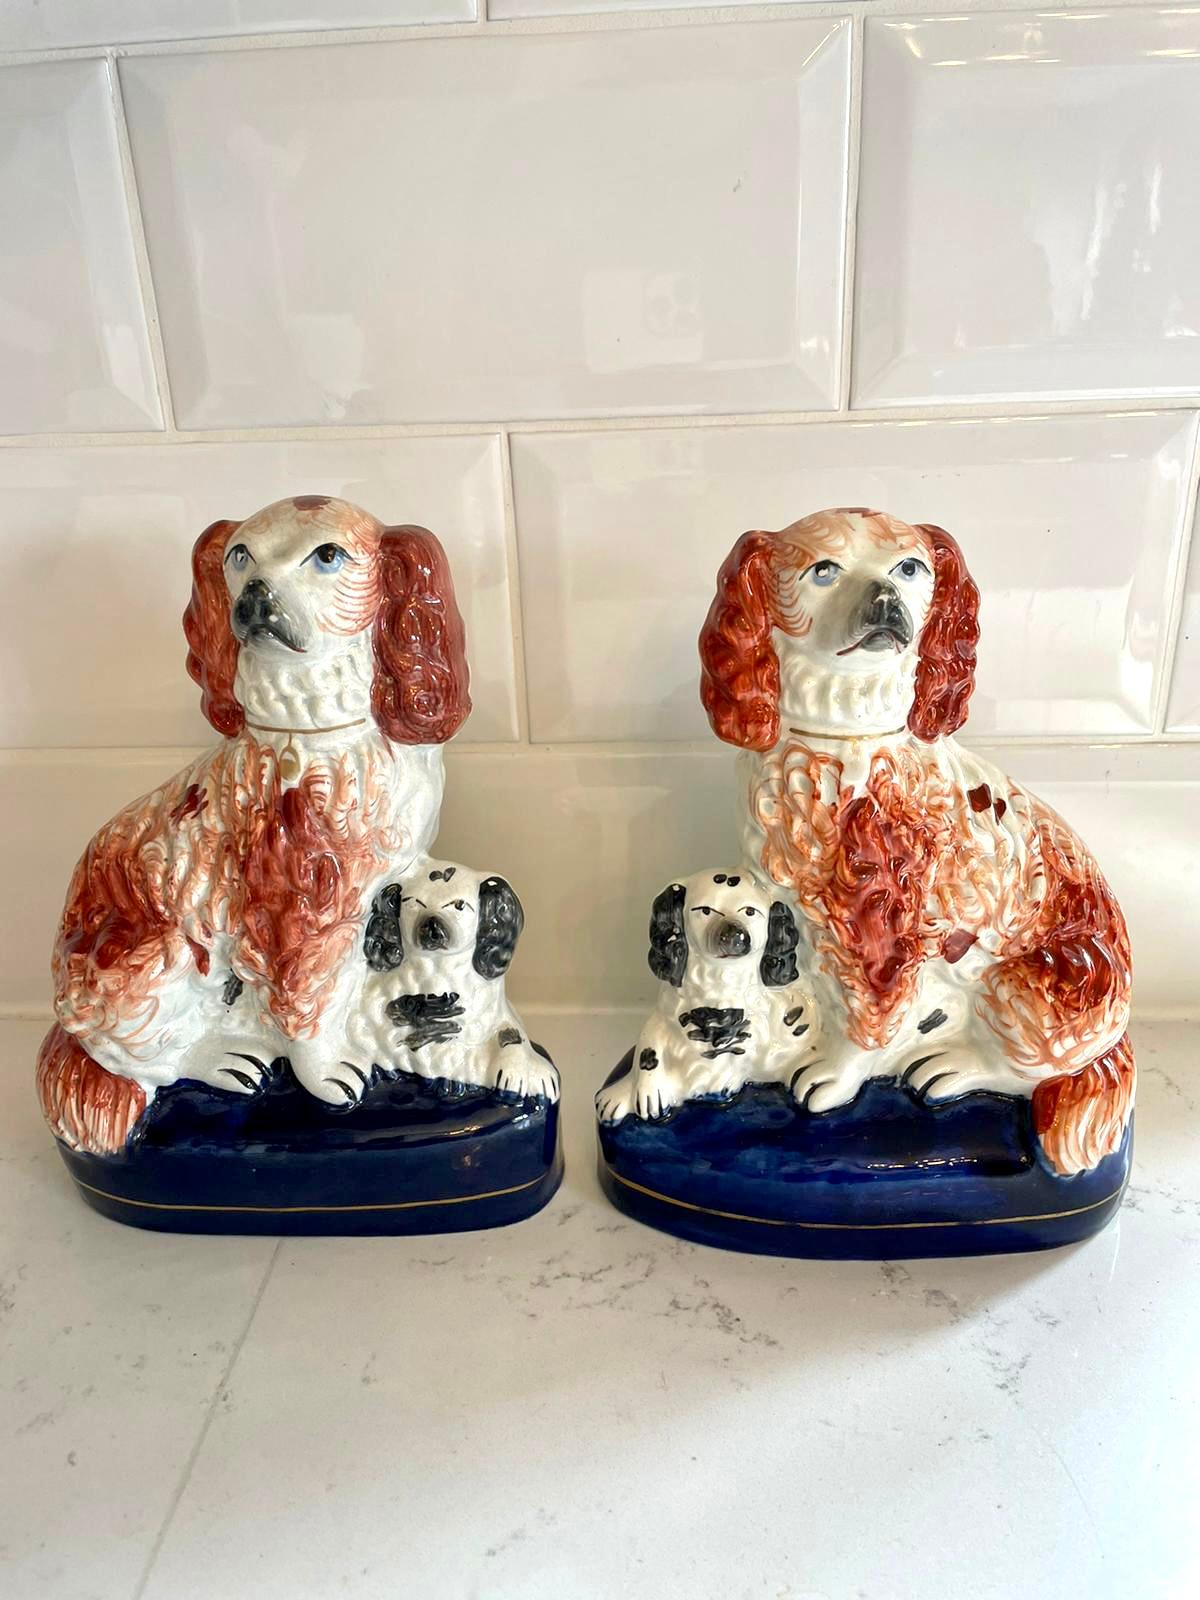 Rare pair of antique Victorian Staffordshire dogs, both Spaniels sitting and having chestnut and white coats accompanied by a black and white Spaniel laying next to them. 

A charming pair in lovely original condition.

Measures: H 20.5cm 
W